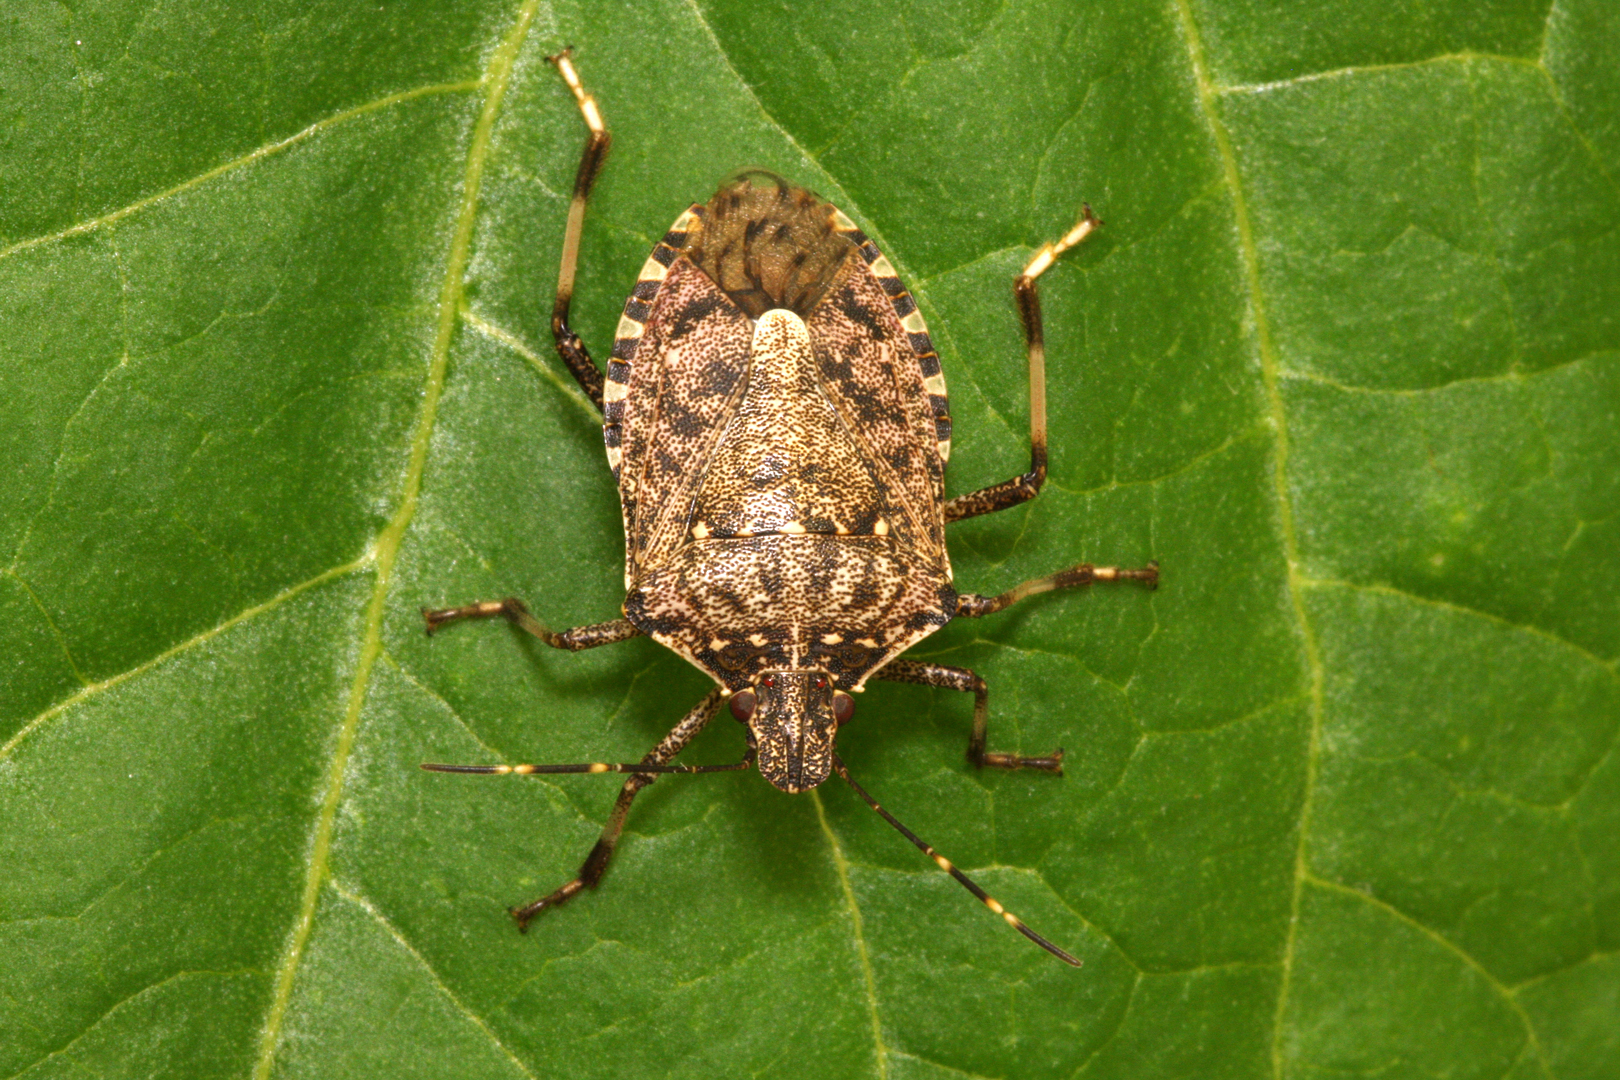 different kinds of stink bugs